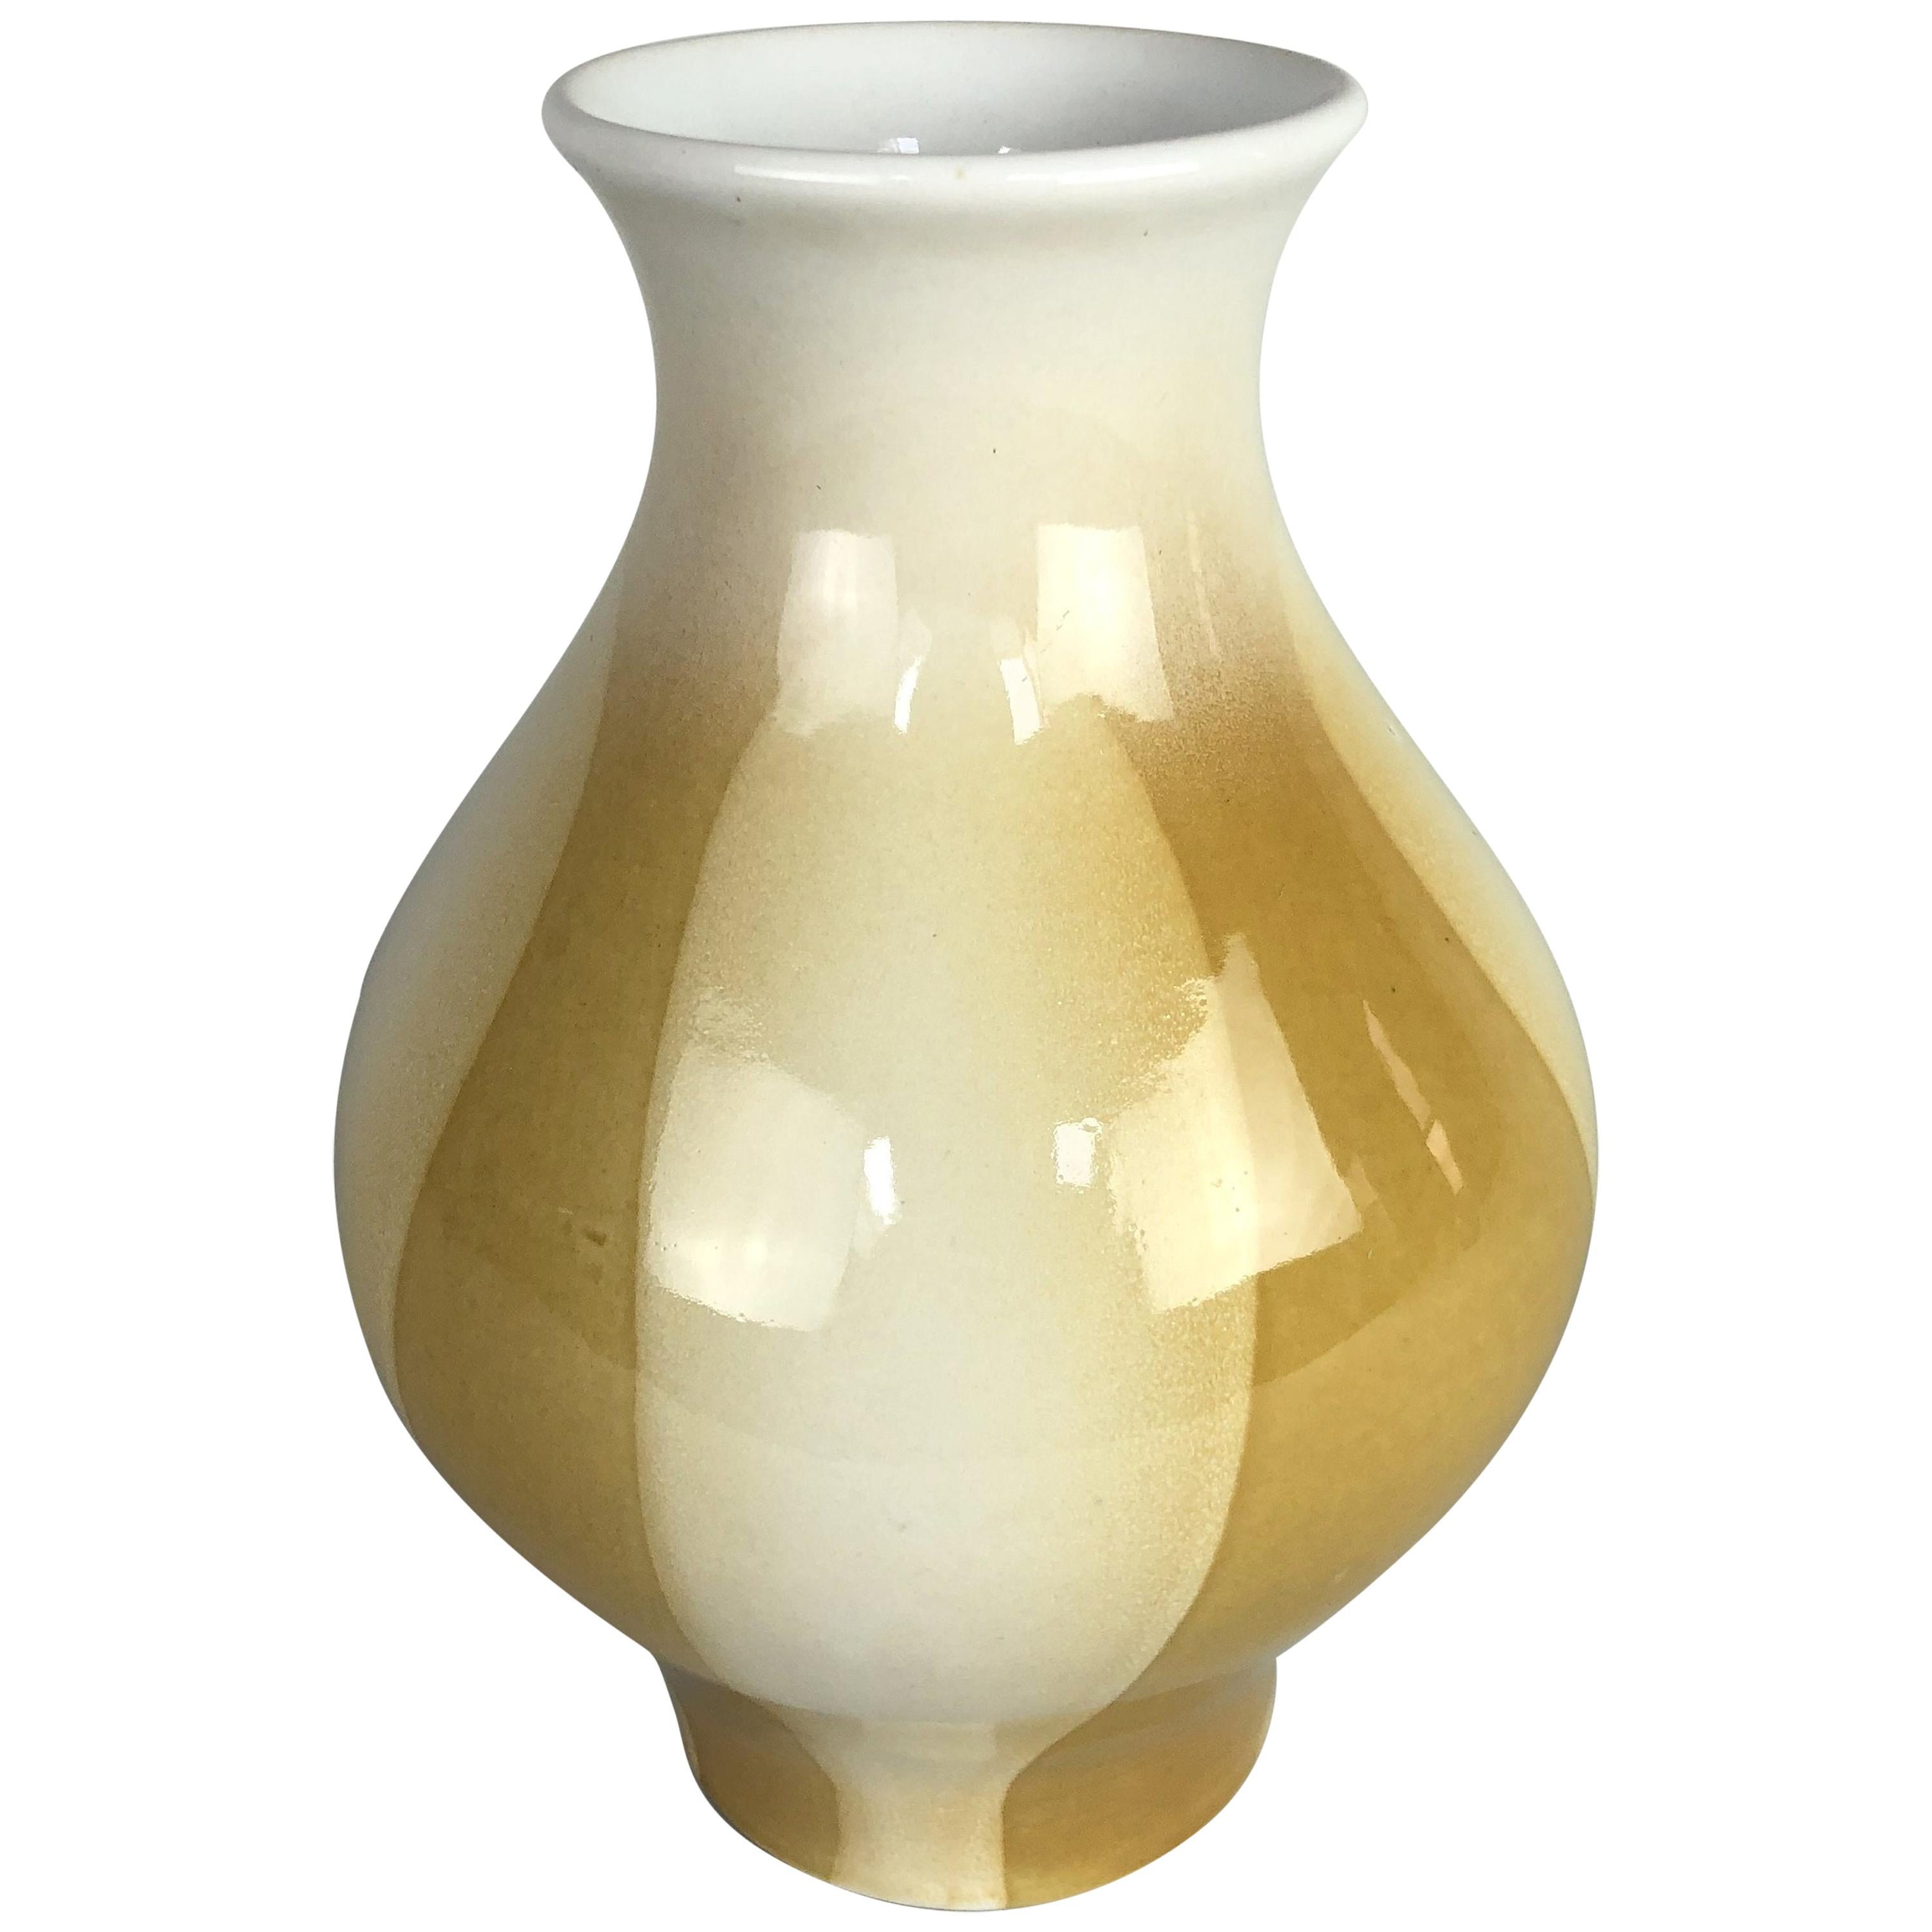 Midcentury Vase by Ditmar Urbach, Collection Julie, 1964